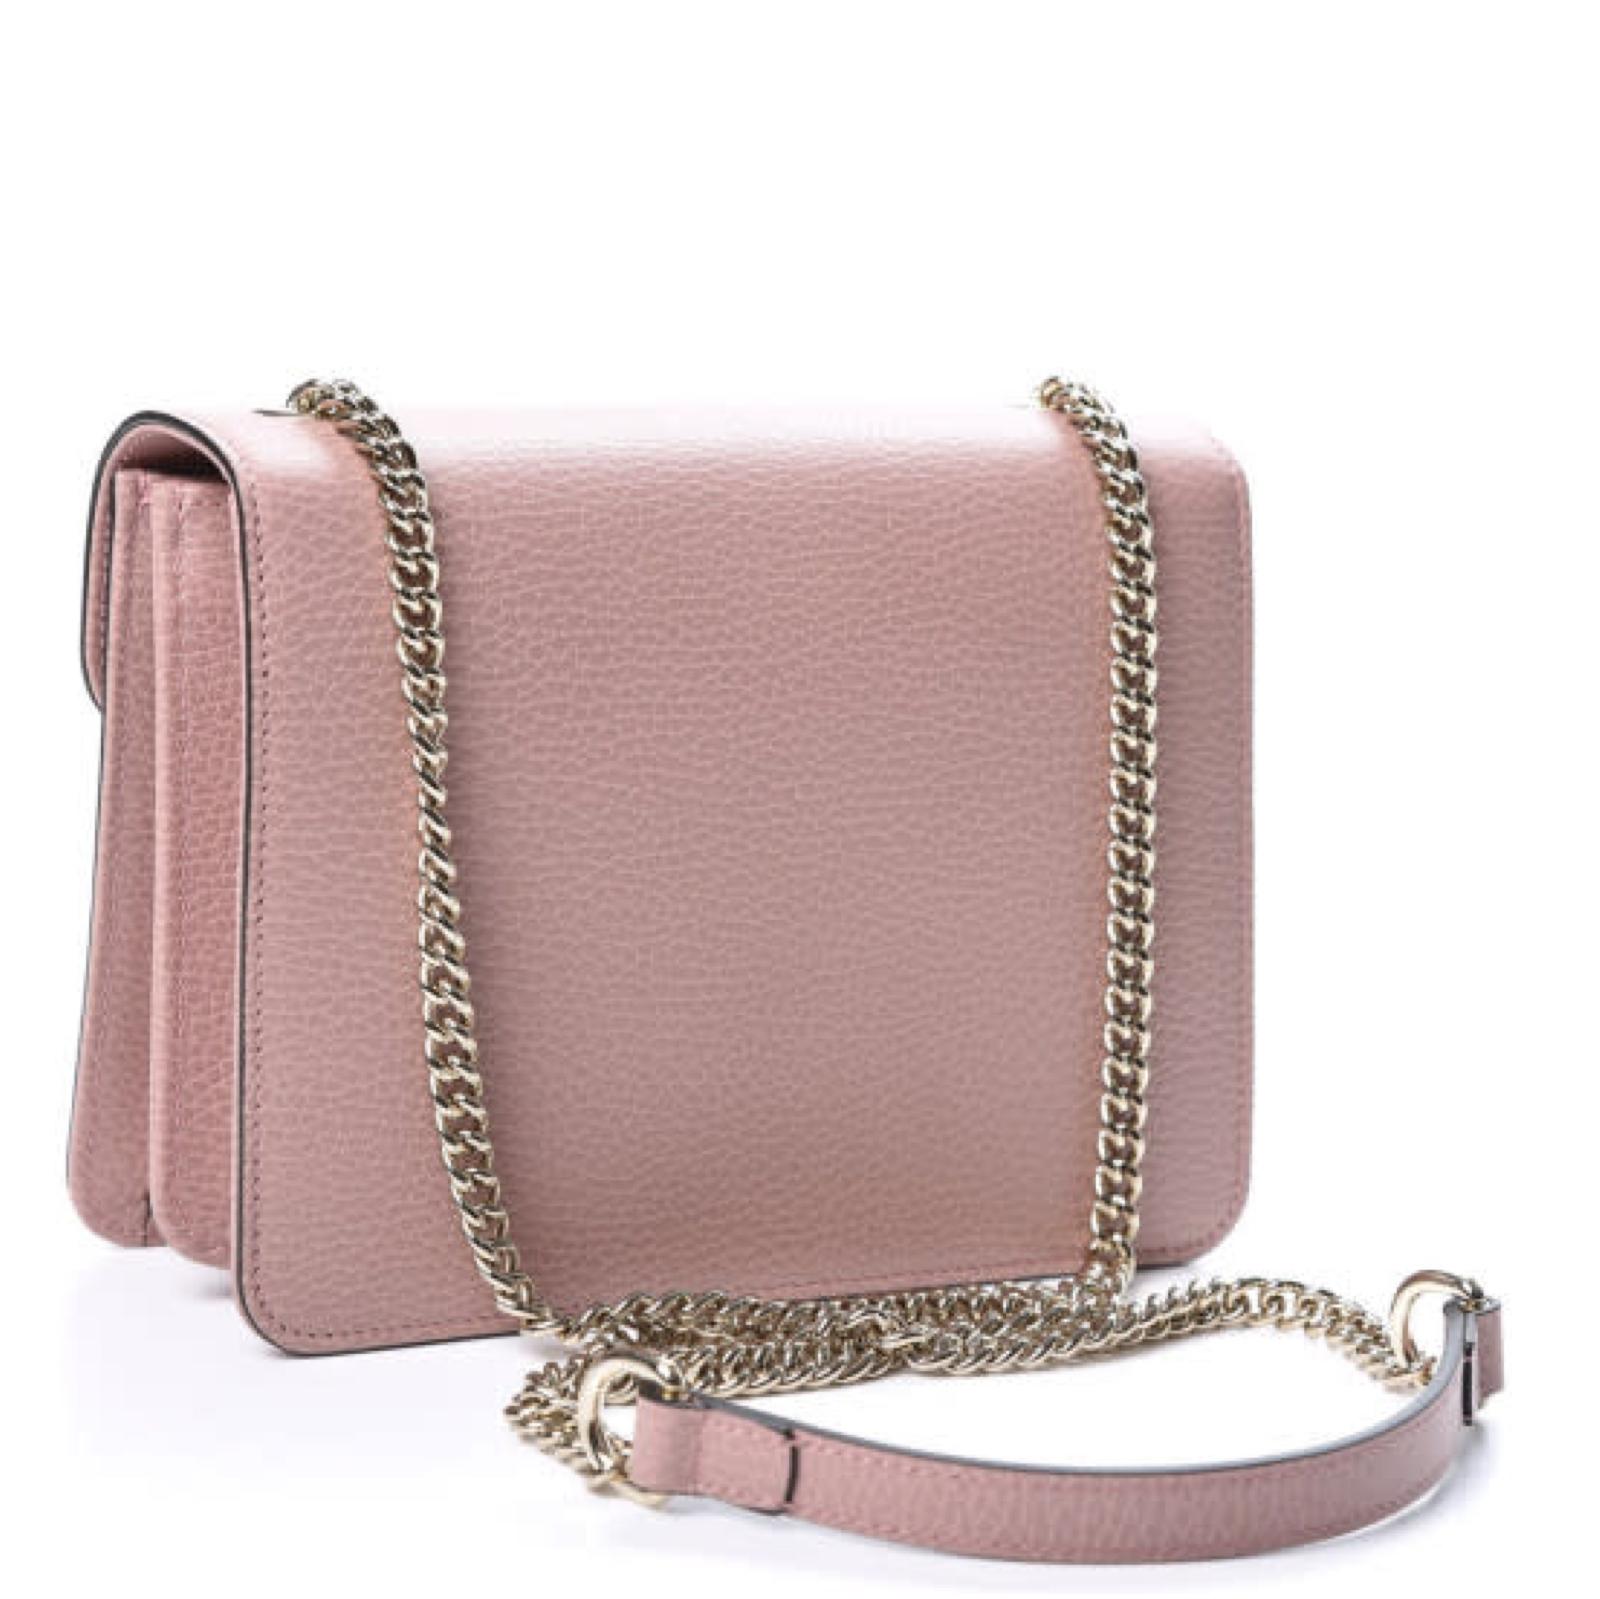 The bag has a waist-length shoulder strap in sliver tone and a front flap with an interlocking GG emblem. The flap opens to a partitioned fabric interior with a patch pocket.

COLOR: Pink
MATERIAL: Leather
ITEM CODE: 510304 204991
MEASURES: H 5.75